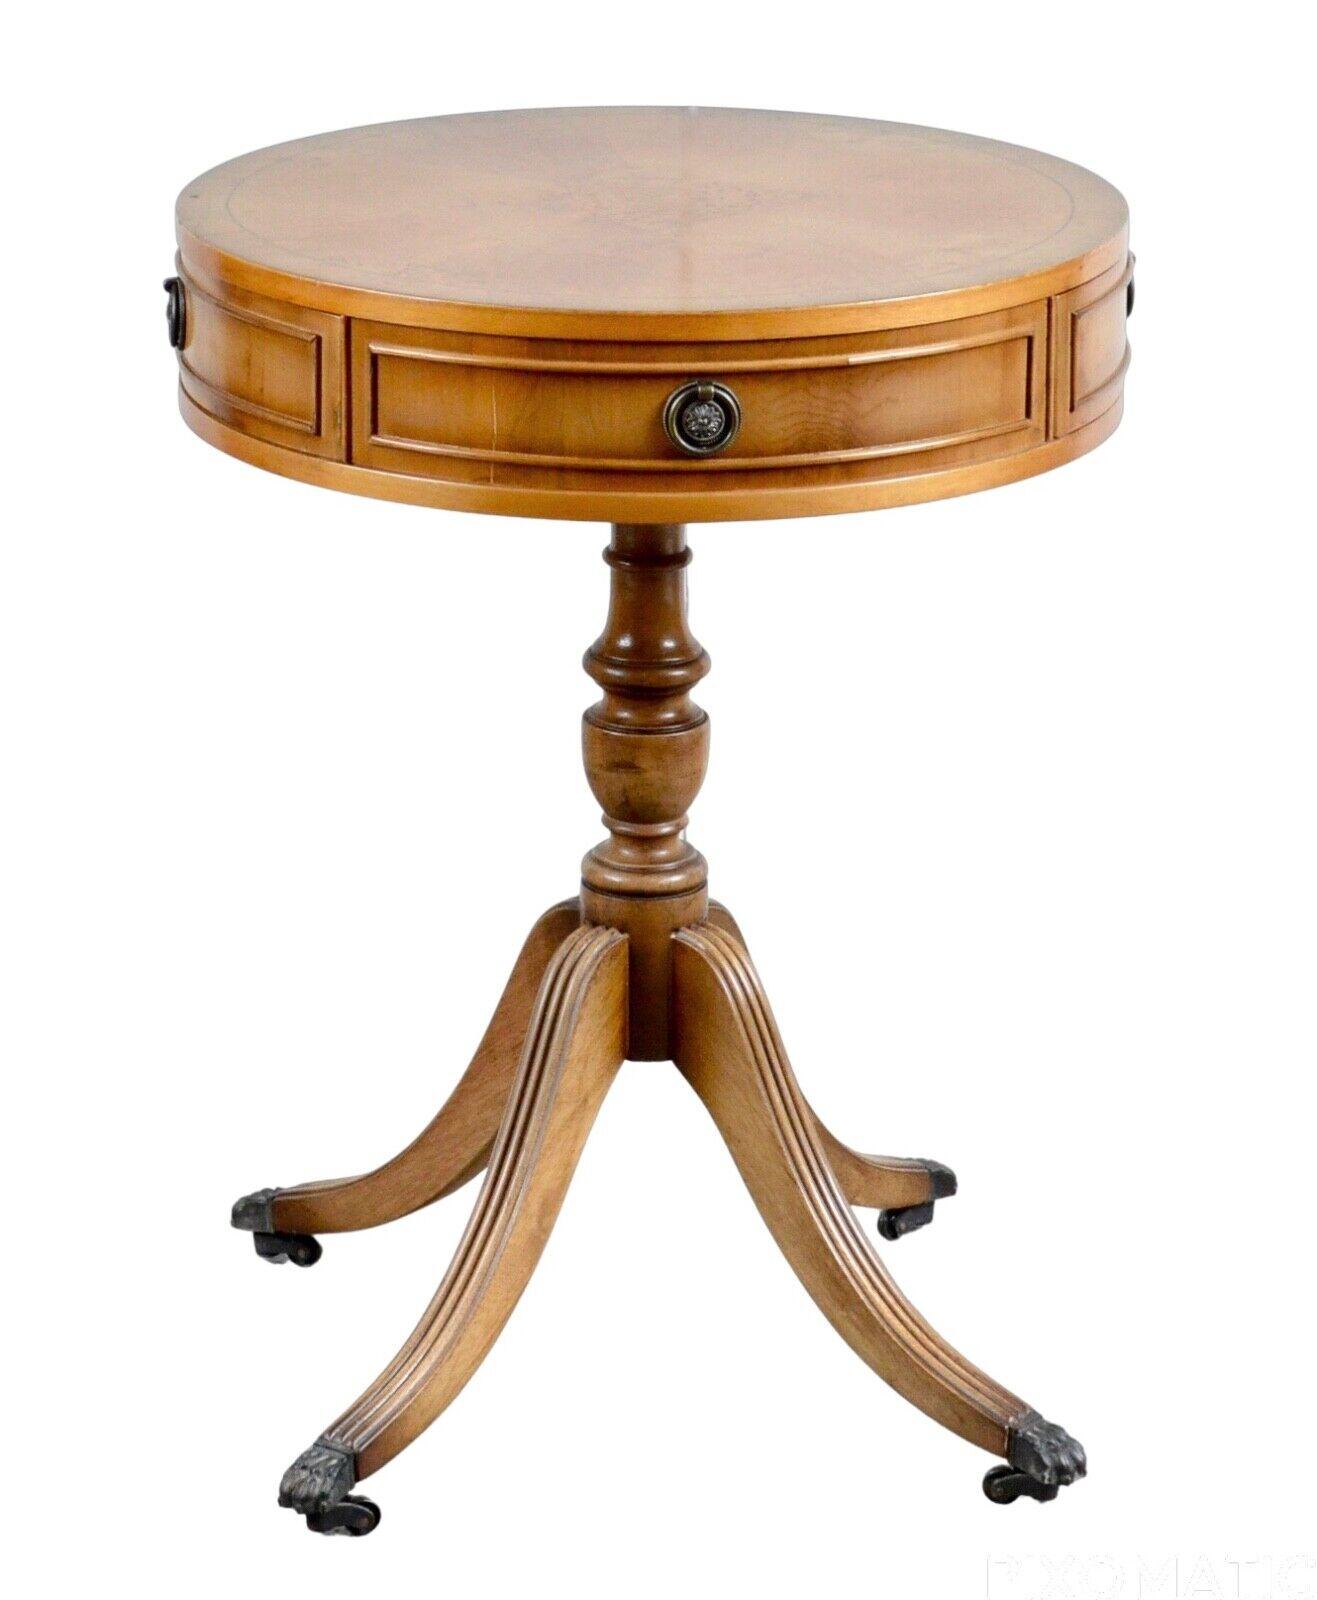 We are delighted to offer for sale this fine quality yew drum table by N. Norman LTD London.
This beautiful table has two drawers and is fitted with brass ring handles, raised on a turned column, and out swept reeded legs with claw feet and